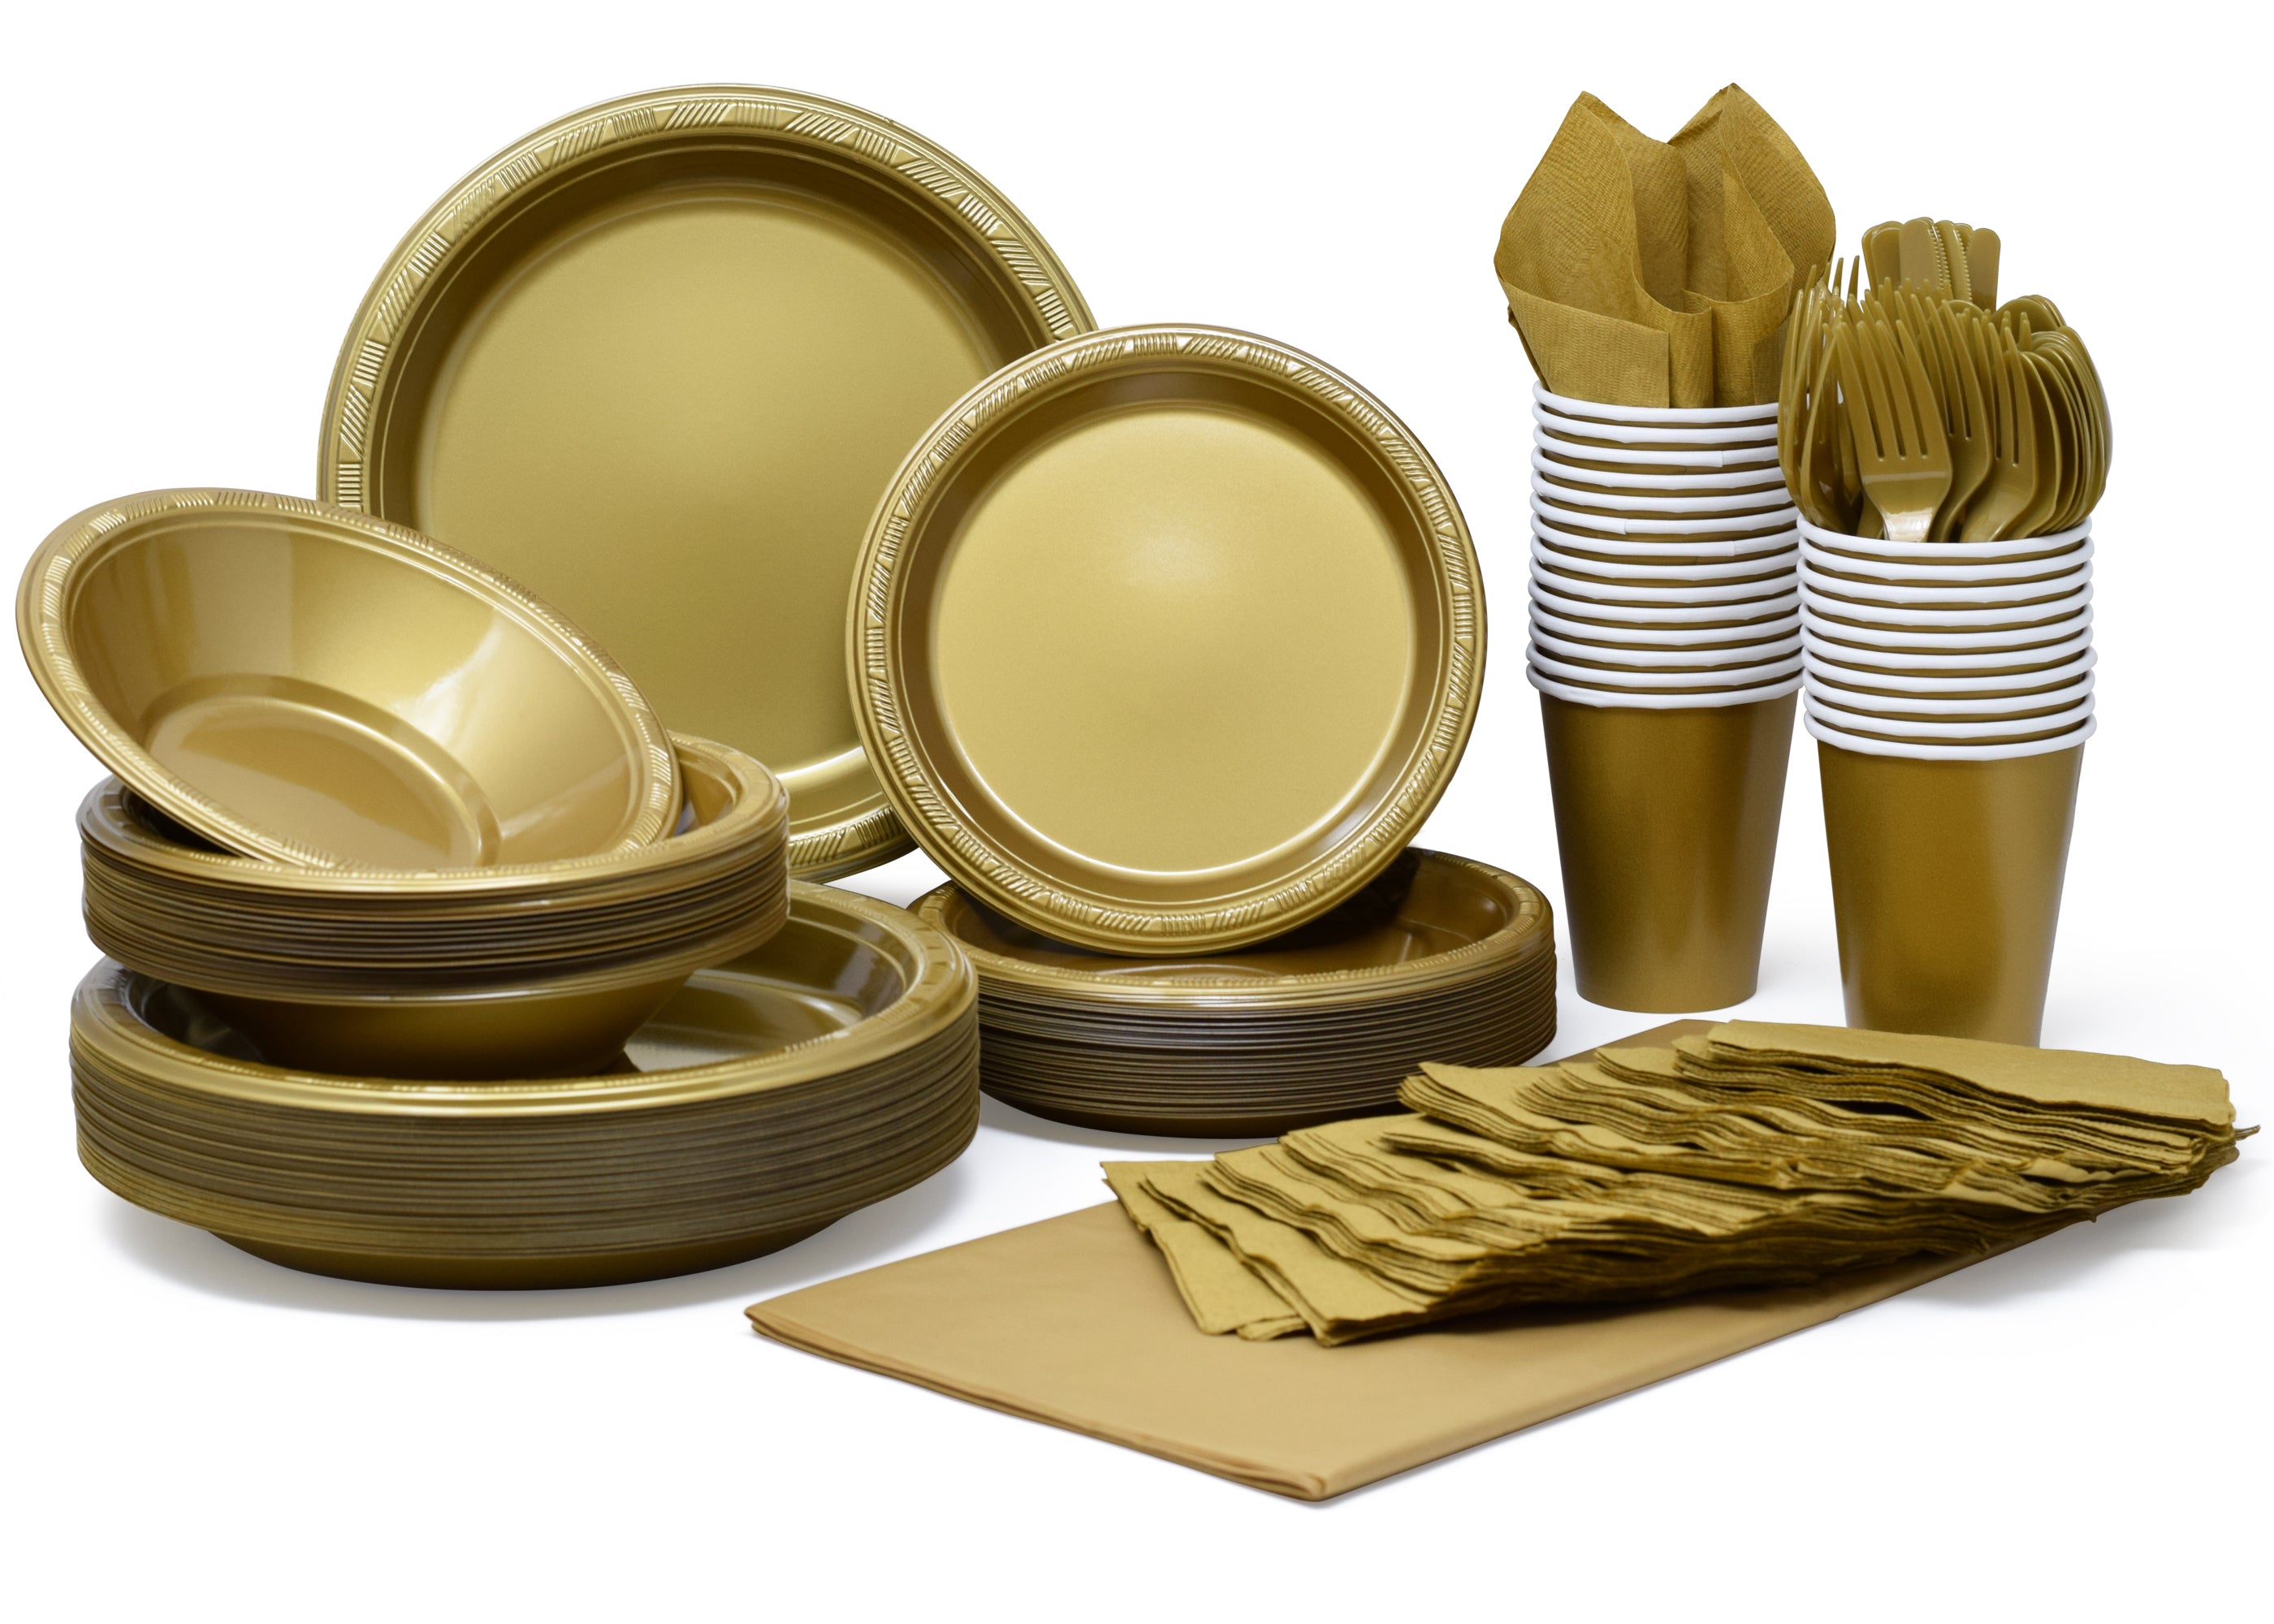 Pans Pro Tableware 48 Serving Party Set, Forks, Spoons, Knives, Plates, Bowls, Cups, Napkins, Tablecovers Gold